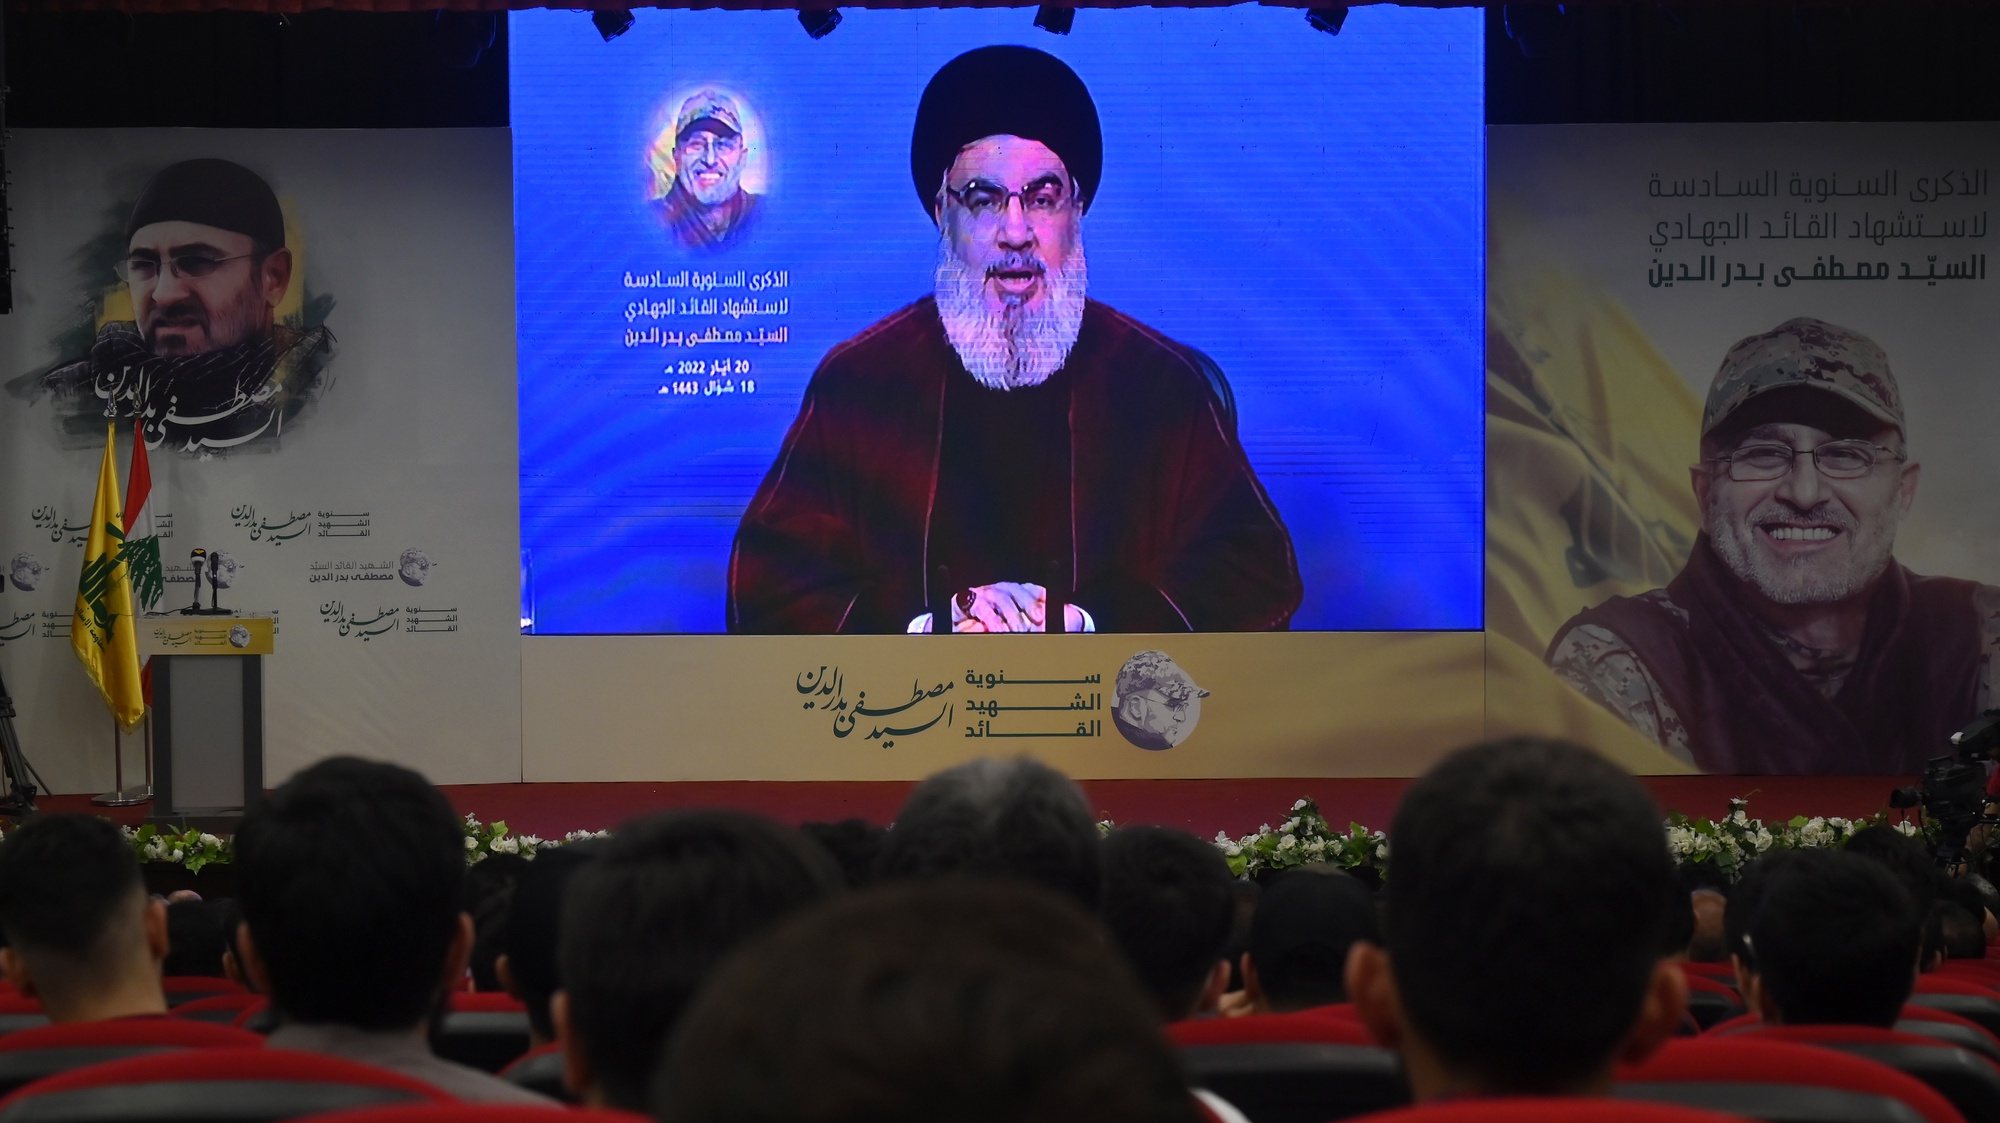 epa09960842 Secretary-General of Hezbollah, Sayyed Hassan Nasrallah, delivers a speech via a screen during a rally marking the sixth anniversary of the assassination of late Hezbollah Resistance military commander Mustafa Badreddine, in a suburb outside Beirut, Lebanon, 20 May 2022. Badreddine who was considered Hezbollah&#039;s most senior military commander, was killed in an attack in Syria on 13 May 2016.  EPA/WAEL HAMZEH